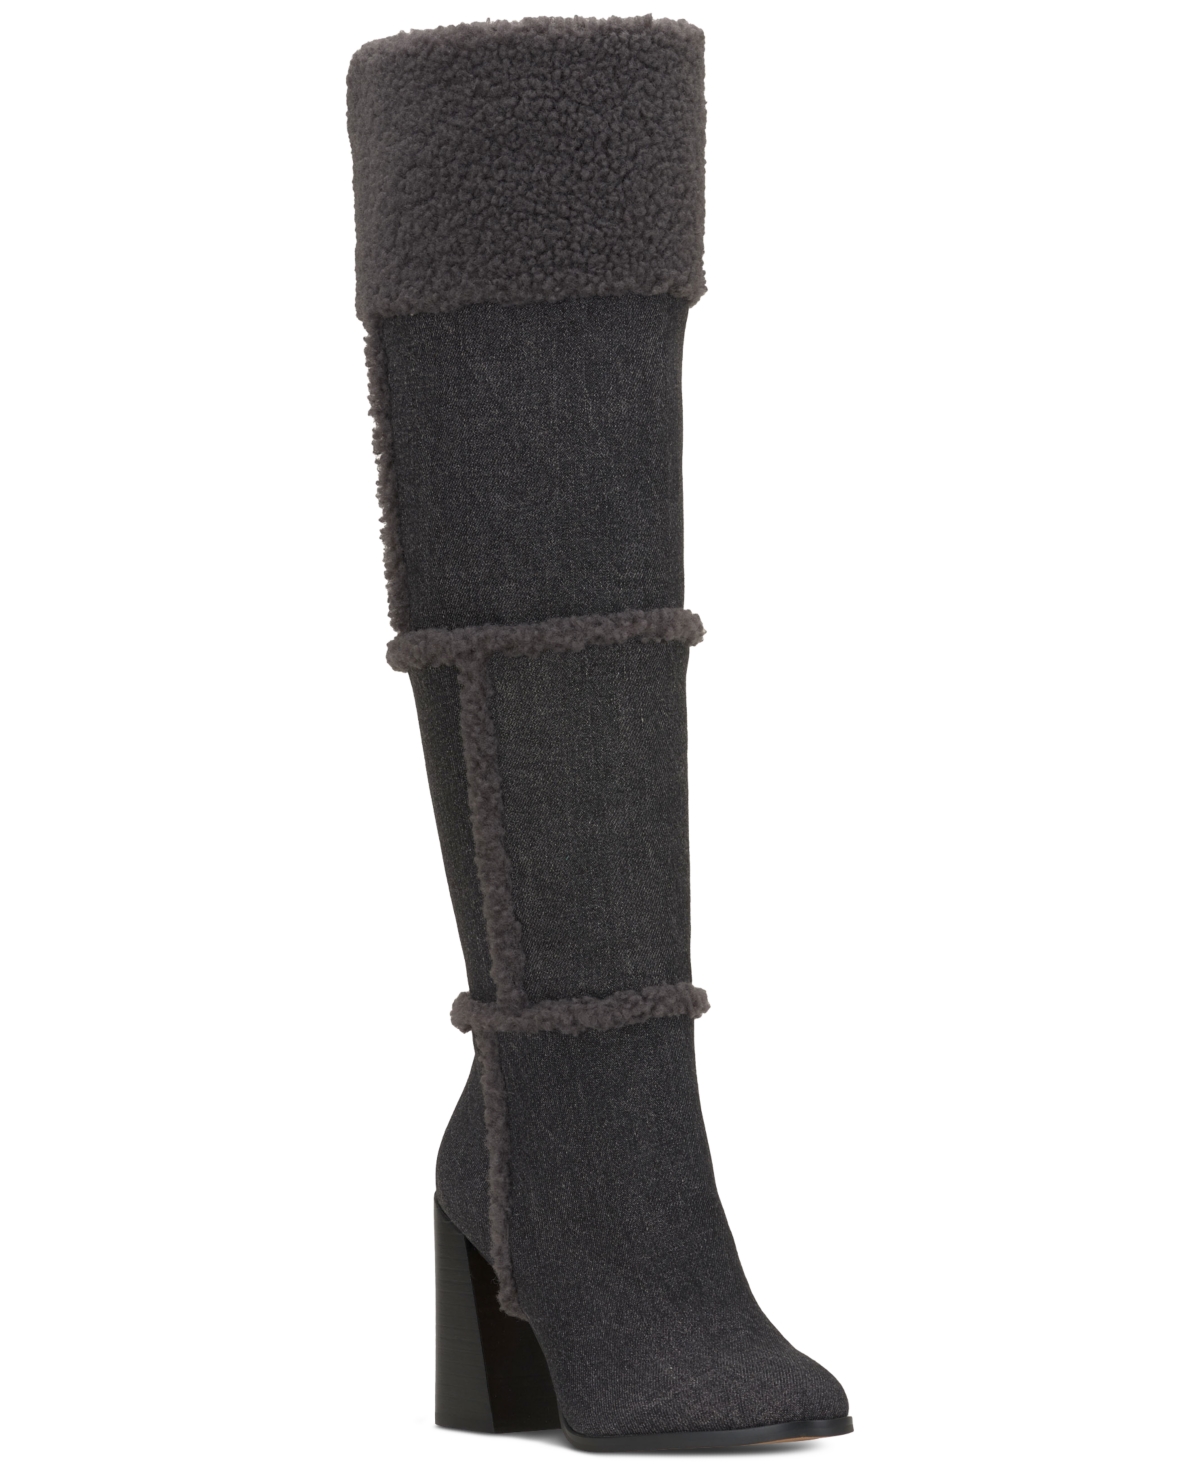 JESSICA SIMPSON RUSTINA OVER-THE-KNEE BOOTS